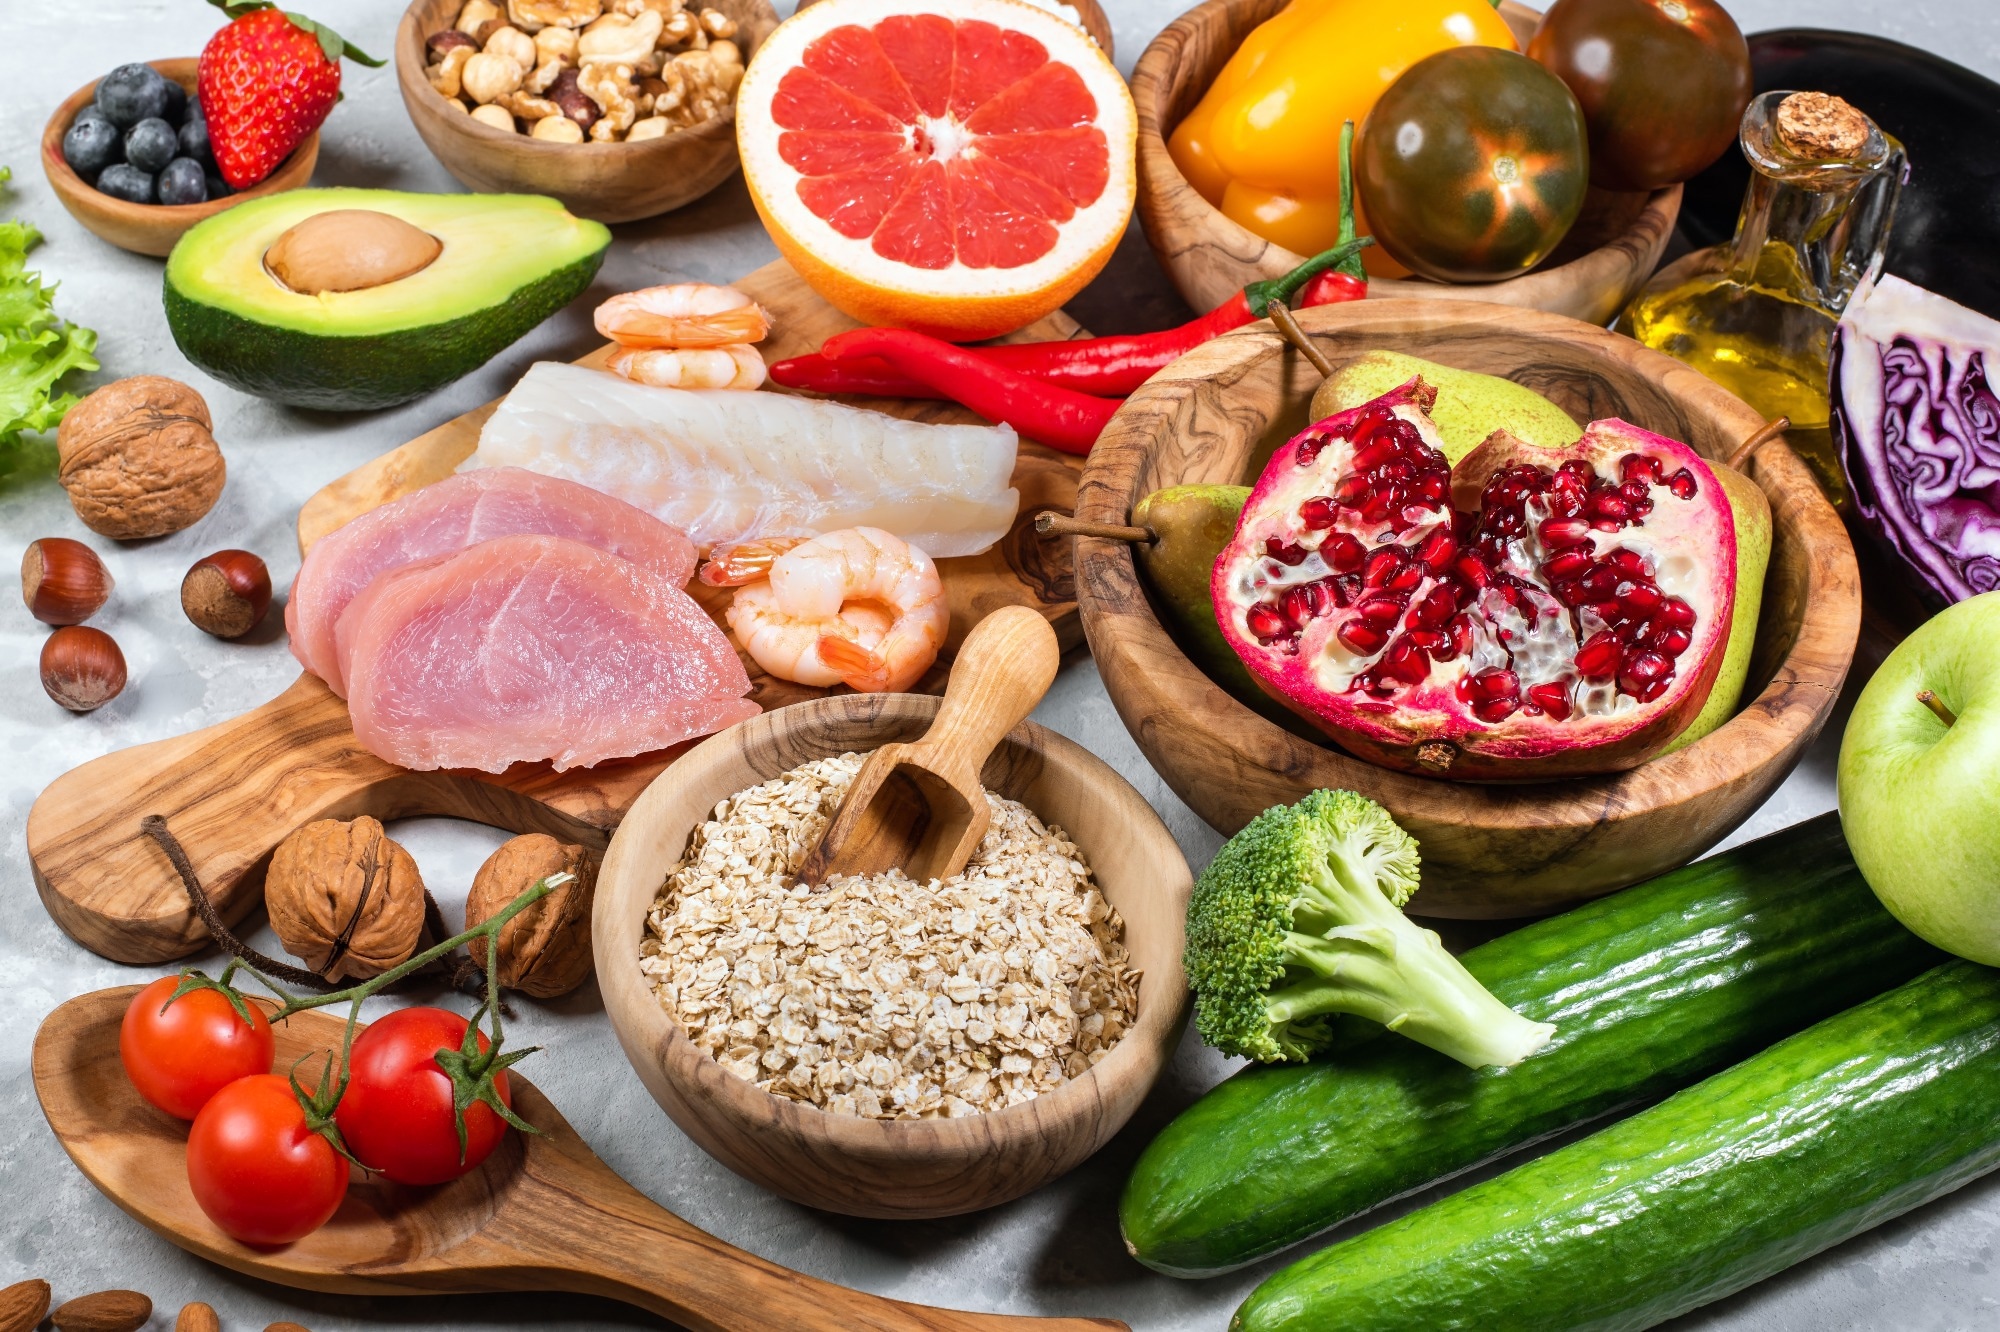 Study: The effect of dietary approaches to stop hypertension and ketogenic diet intervention on serum uric acid concentration: a systematic review and meta-analysis of randomized controlled trials. Image Credit: Alexander Rutz / Shutterstock.com